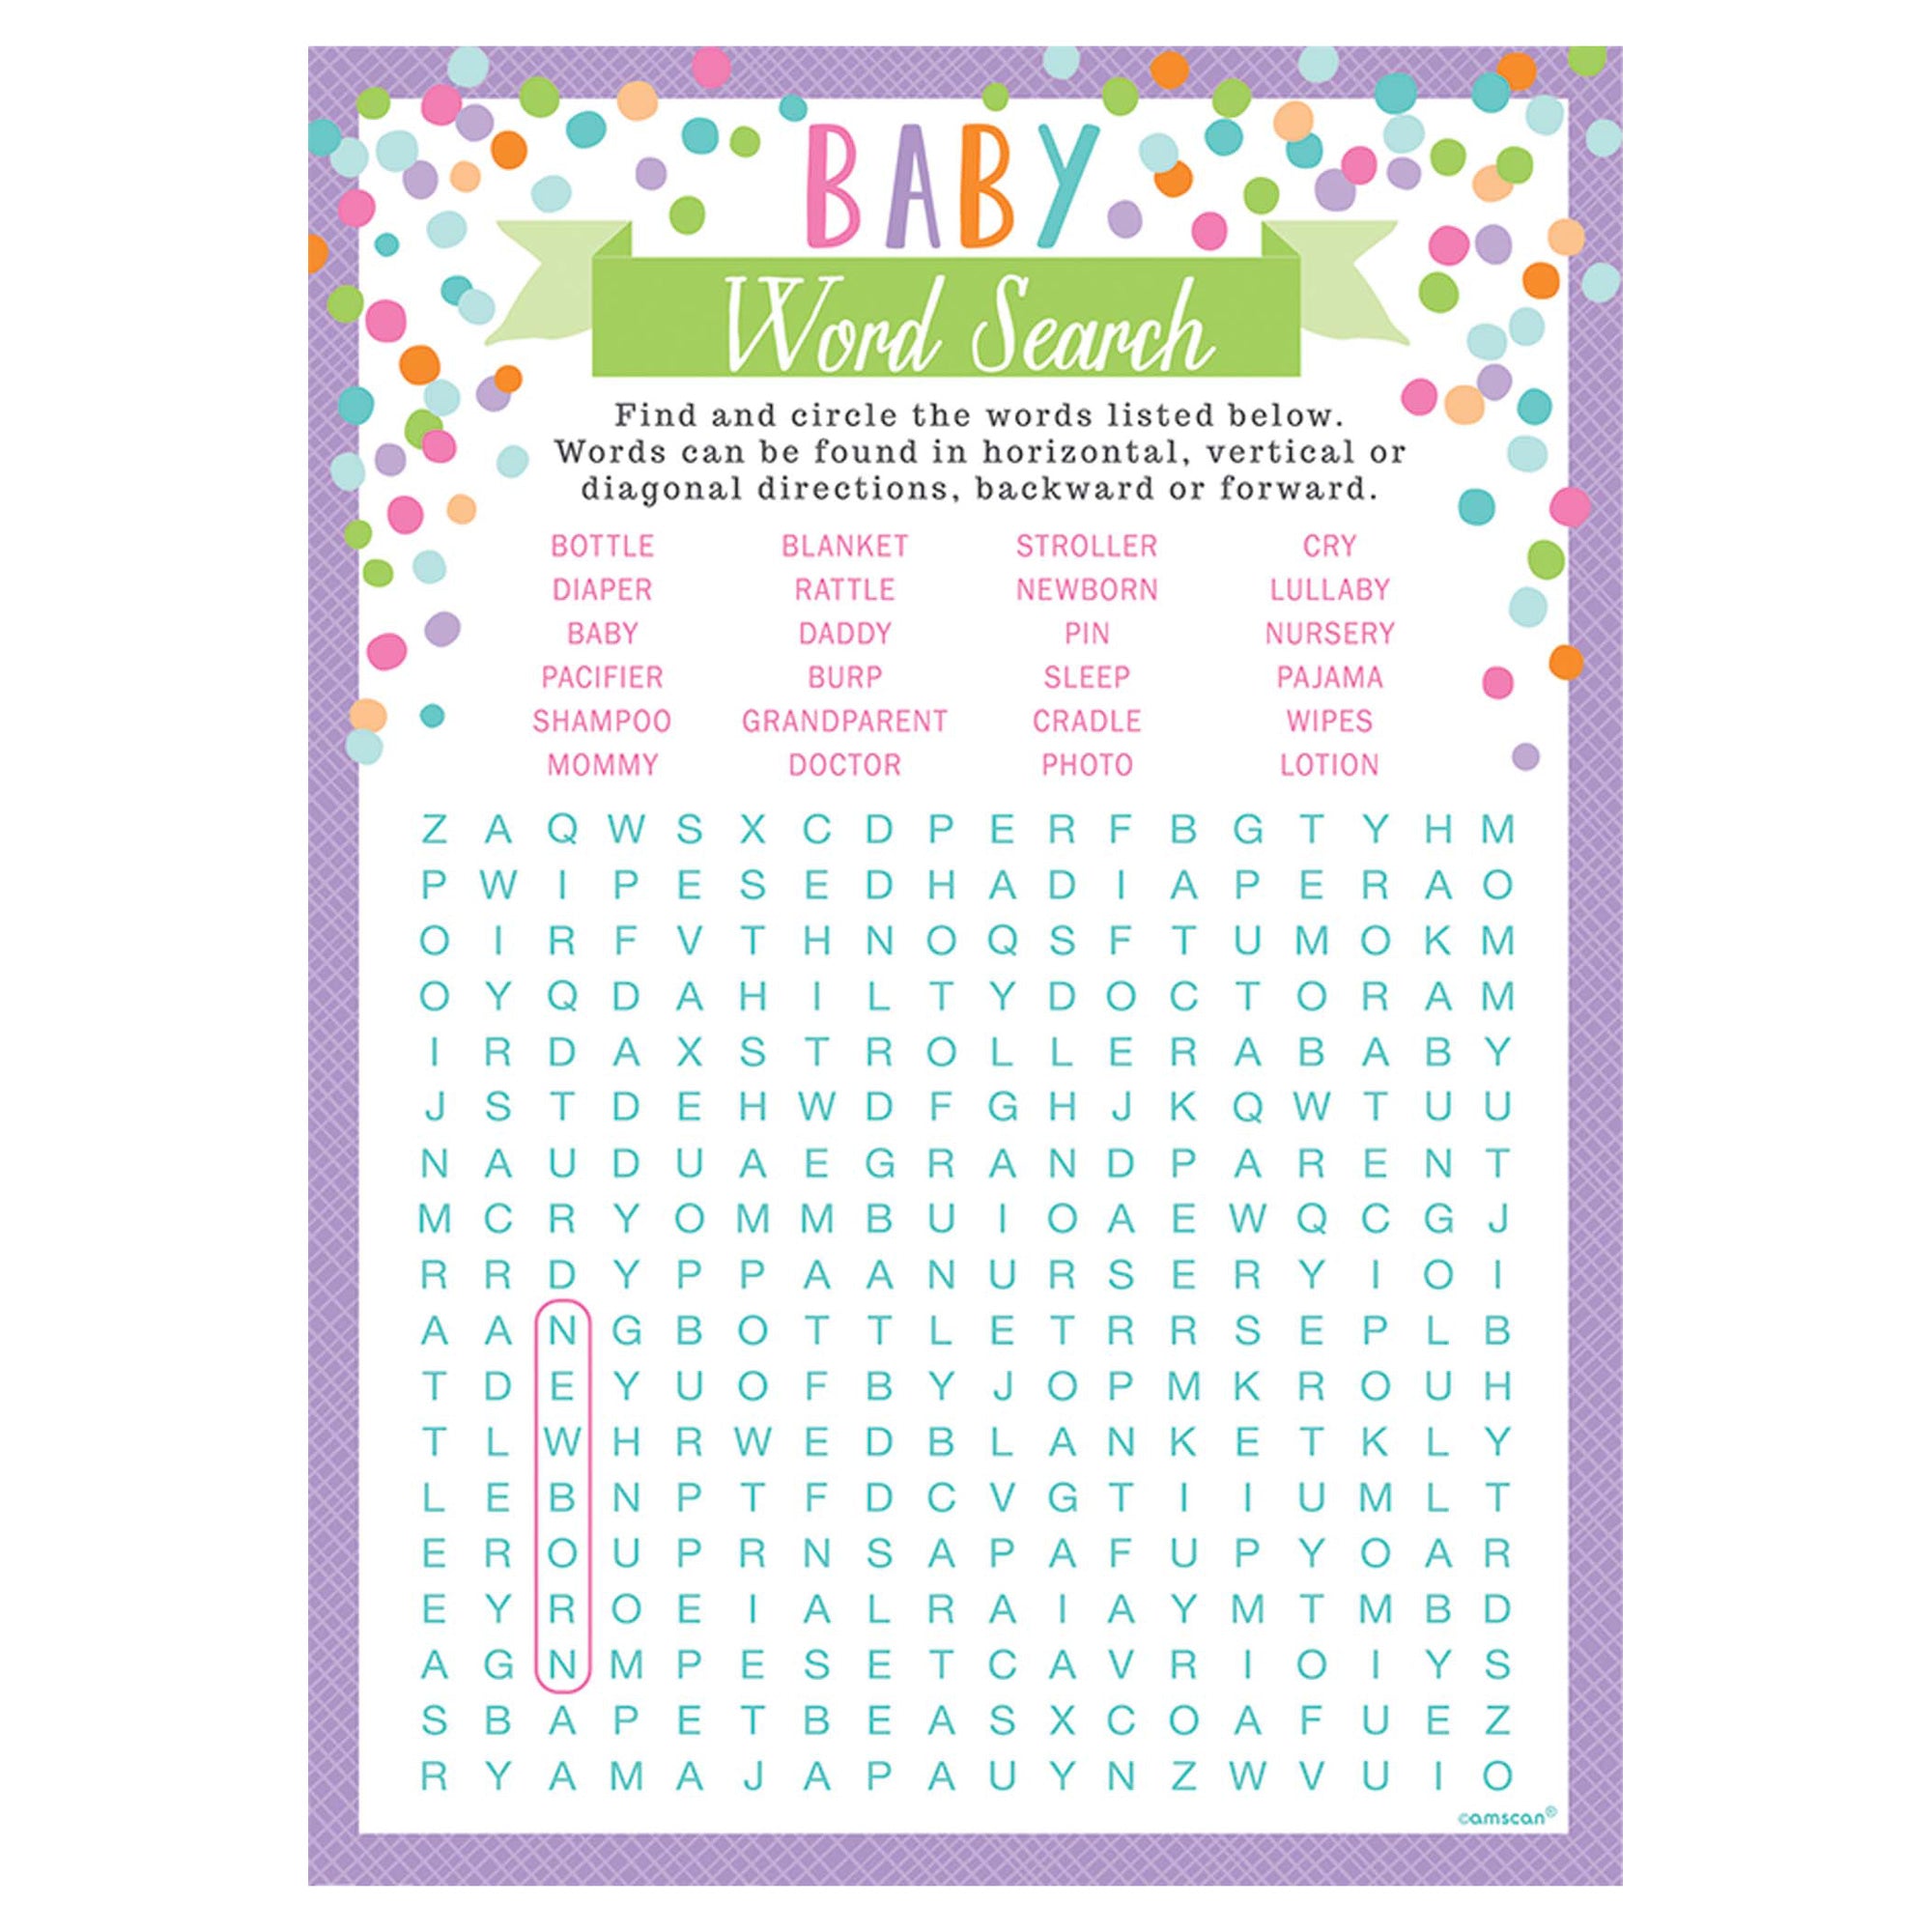 Baby Shower Word Games